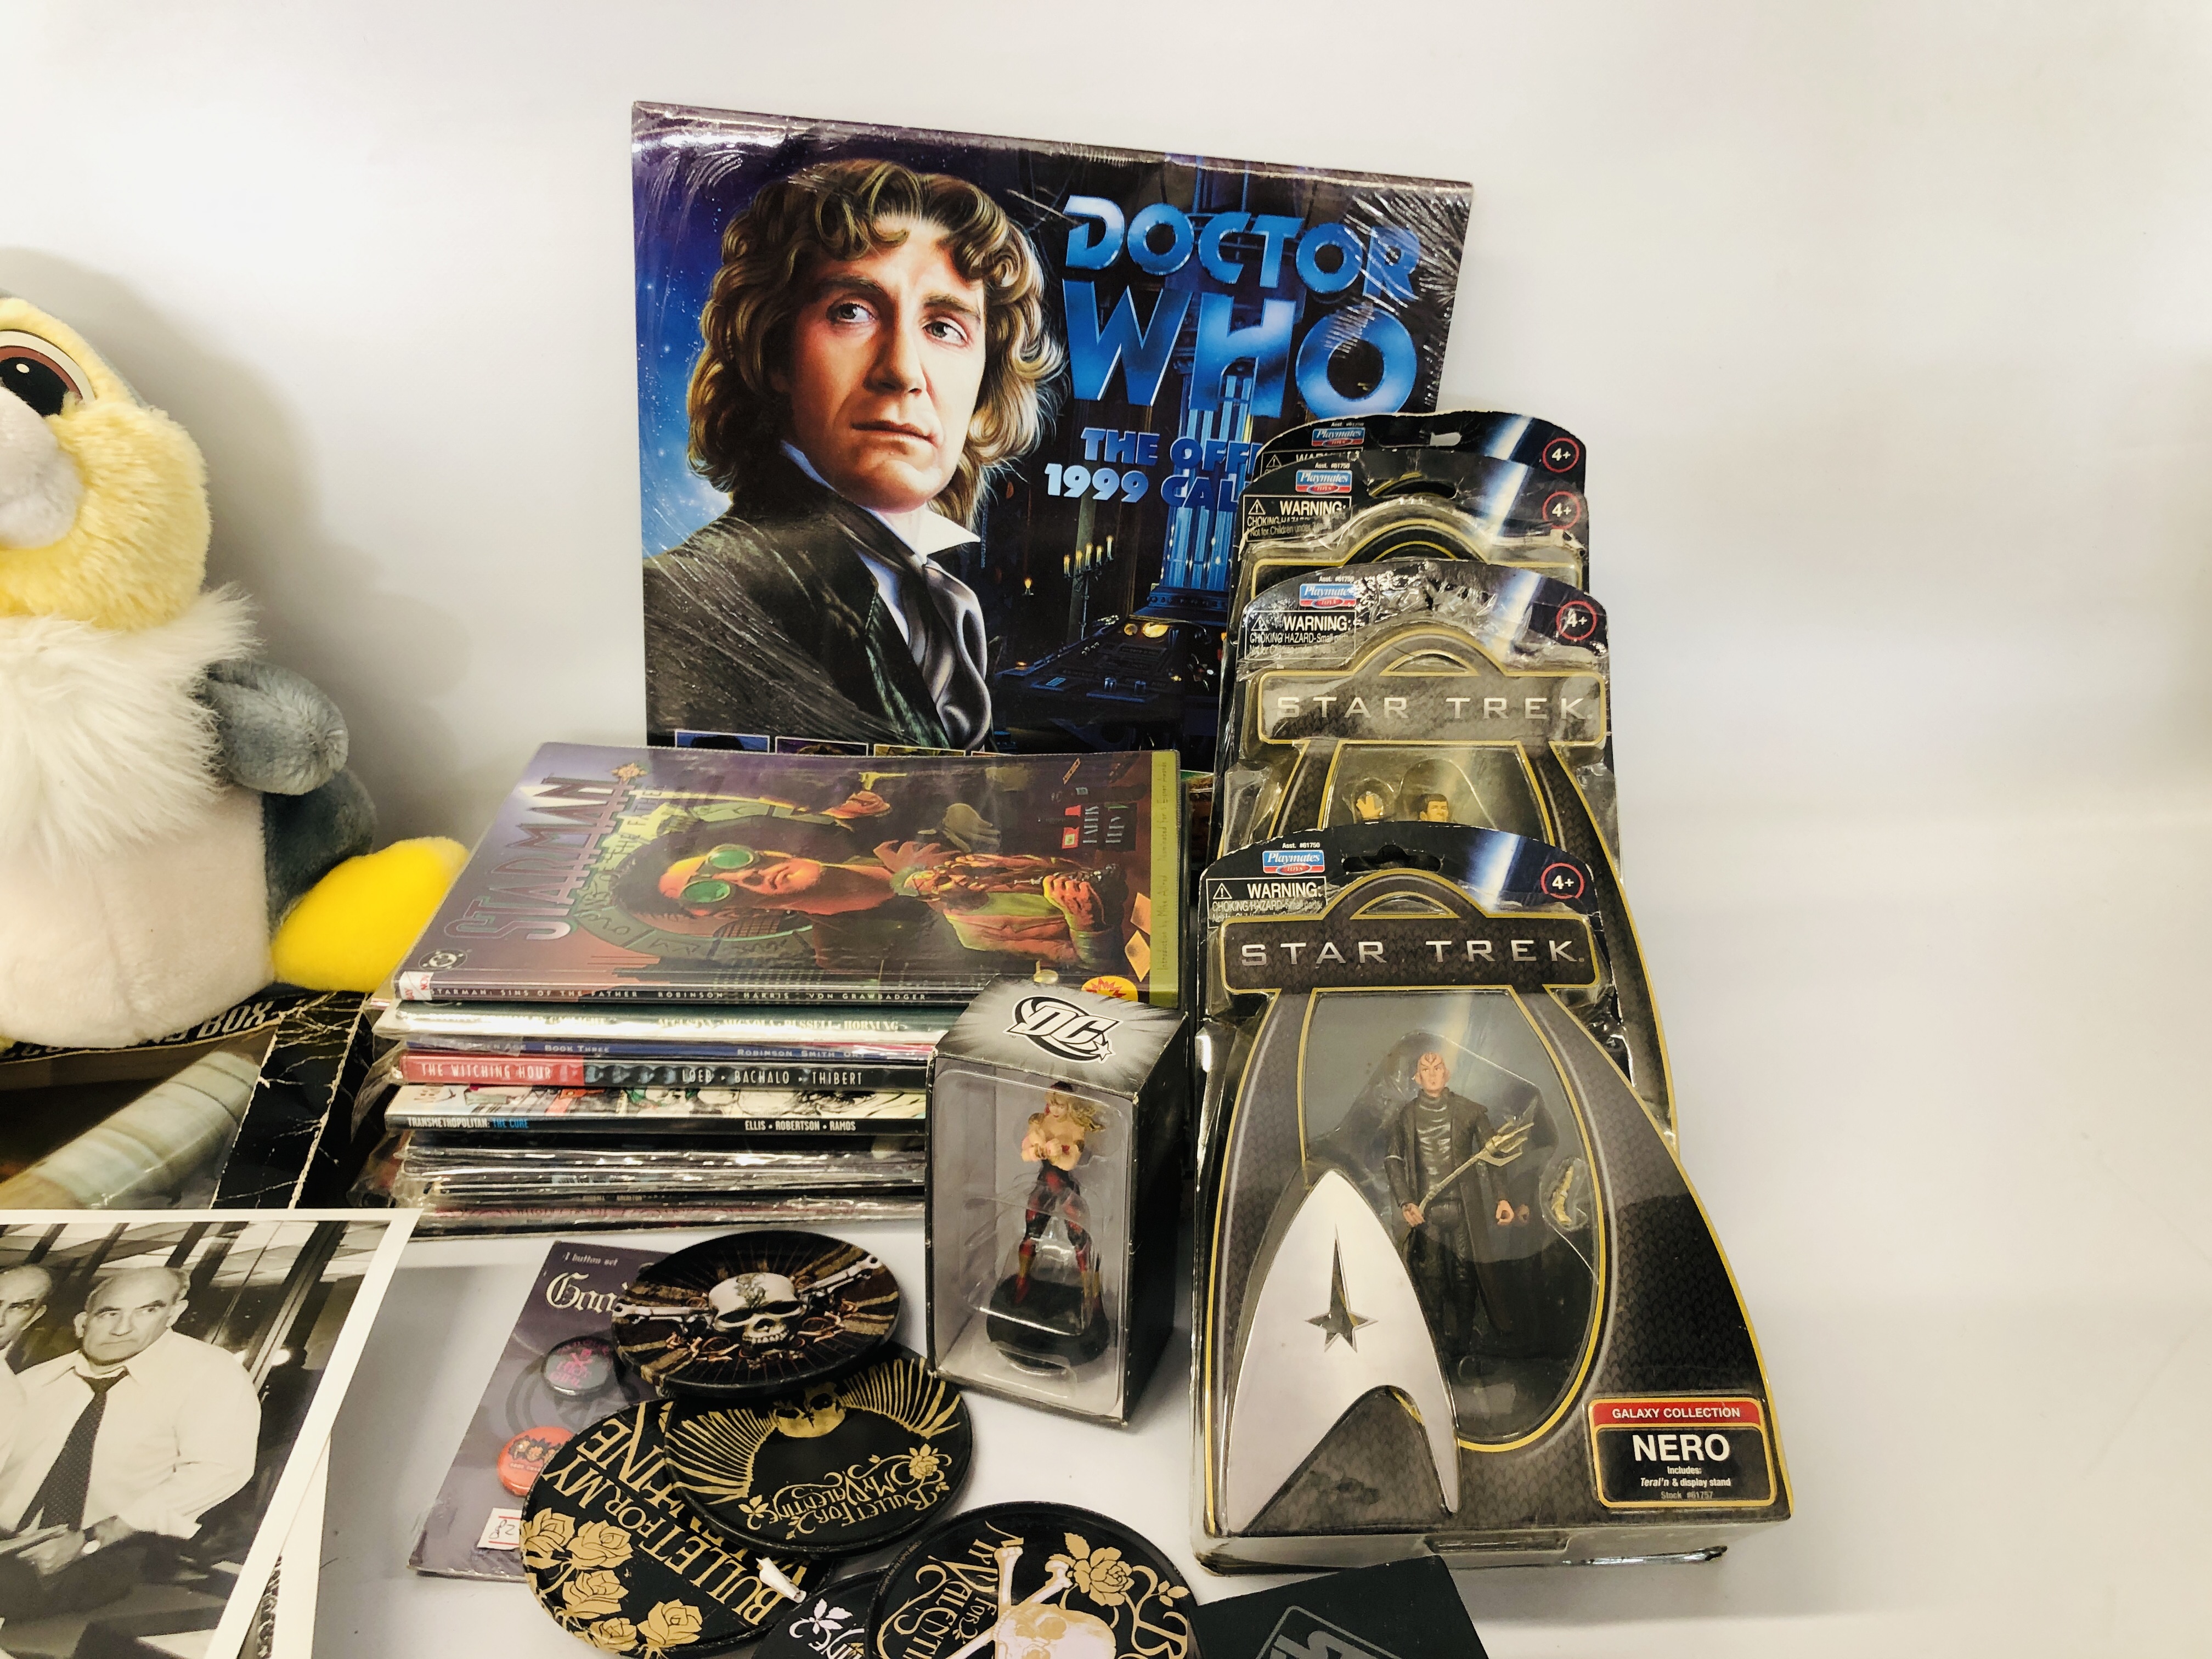 BOX OF COLLECTIBLES MAGAZINES, STAR TREK FIGURES, DOCTOR WHO 1999 CALENDAR, - Image 4 of 7